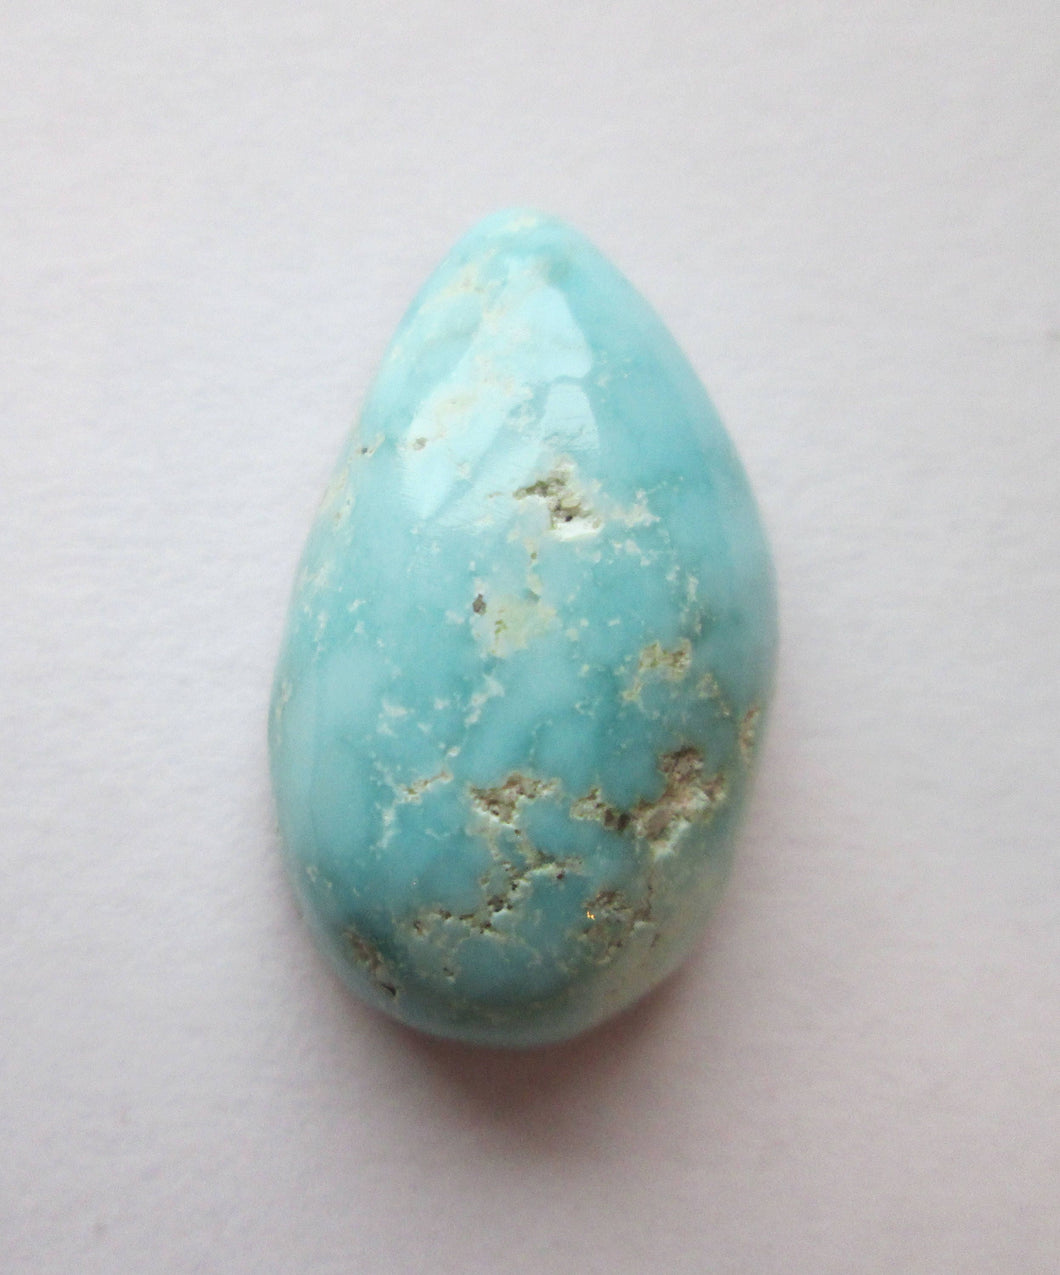 14.20 (21x12x7 mm) Natural Turquoise Mountain Cabochon Gemstone, # 1AS 068